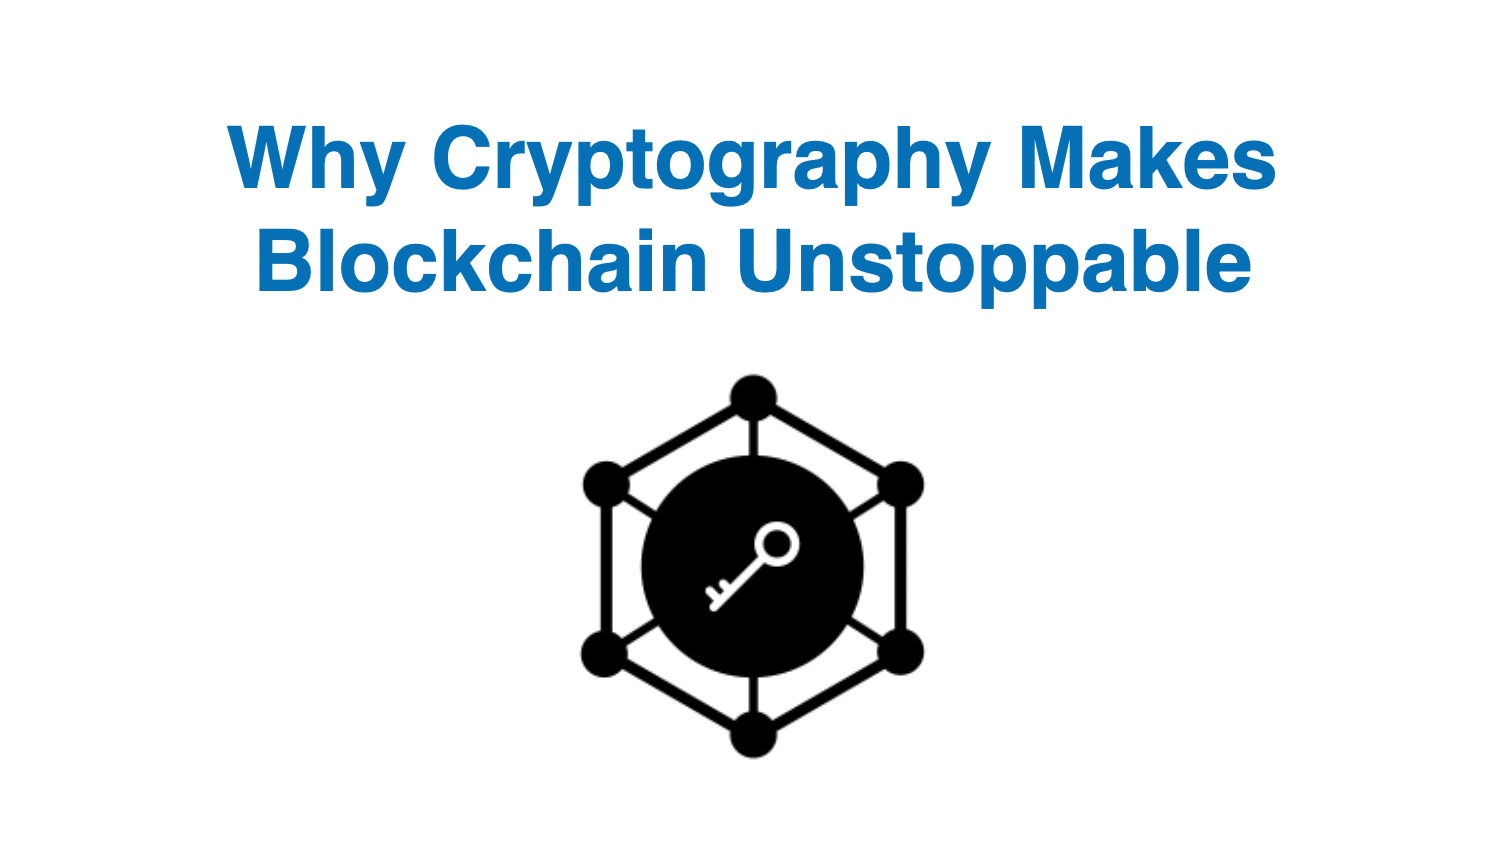 Why Cryptography Makes Blockchain Unstoppable